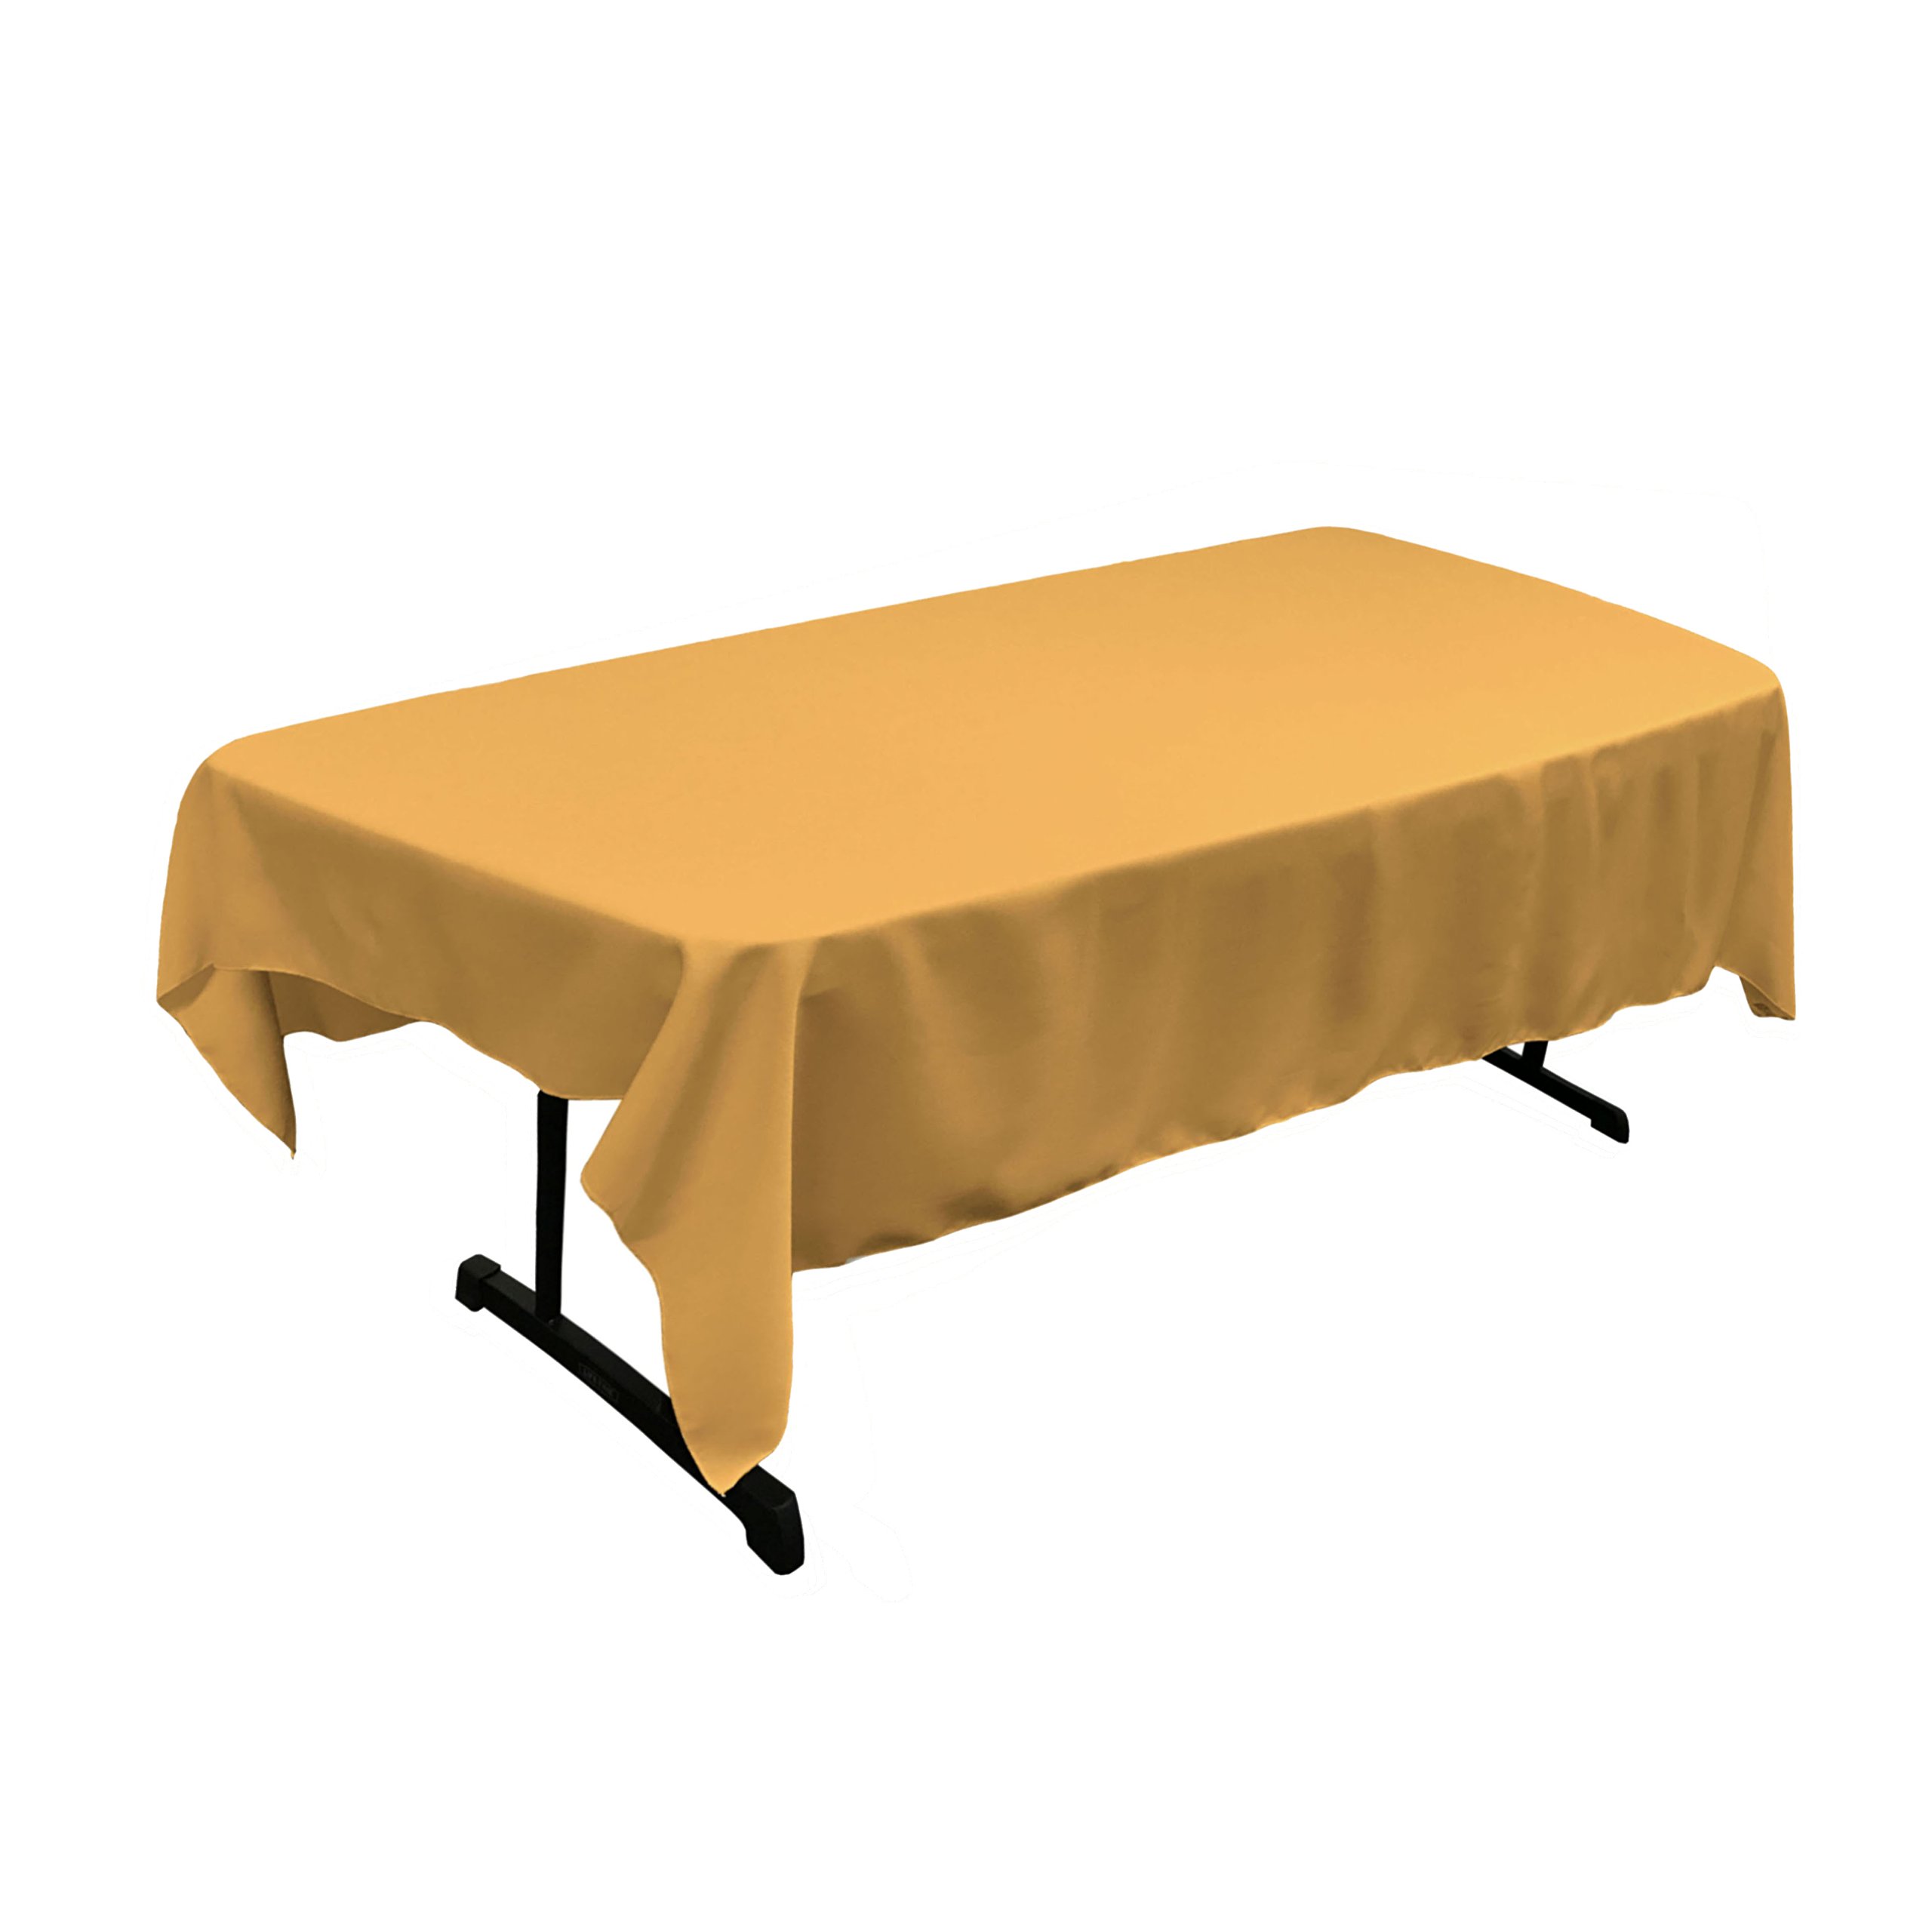 LA Linen Polyester Poplin Washable Rectangular Tablecloth, Stain and Wrinkle Resistant Table Cover 60x84, Fabric Table Cloth for